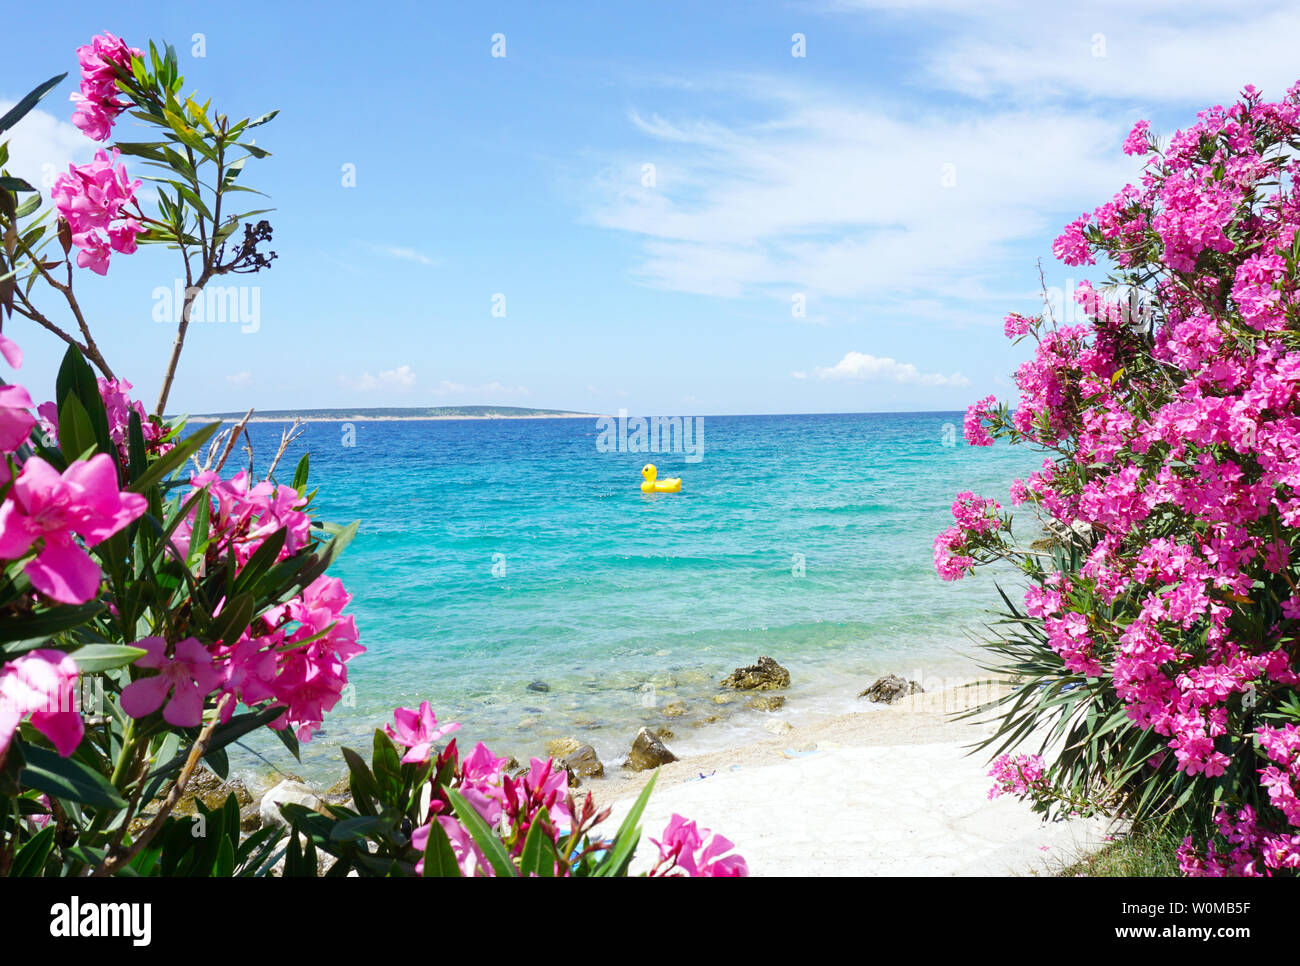 Summer background with clear blue and turquoise sea framed with pink Nerium oleander blooming trees and an inflatable duck on the sea surface Stock Photo